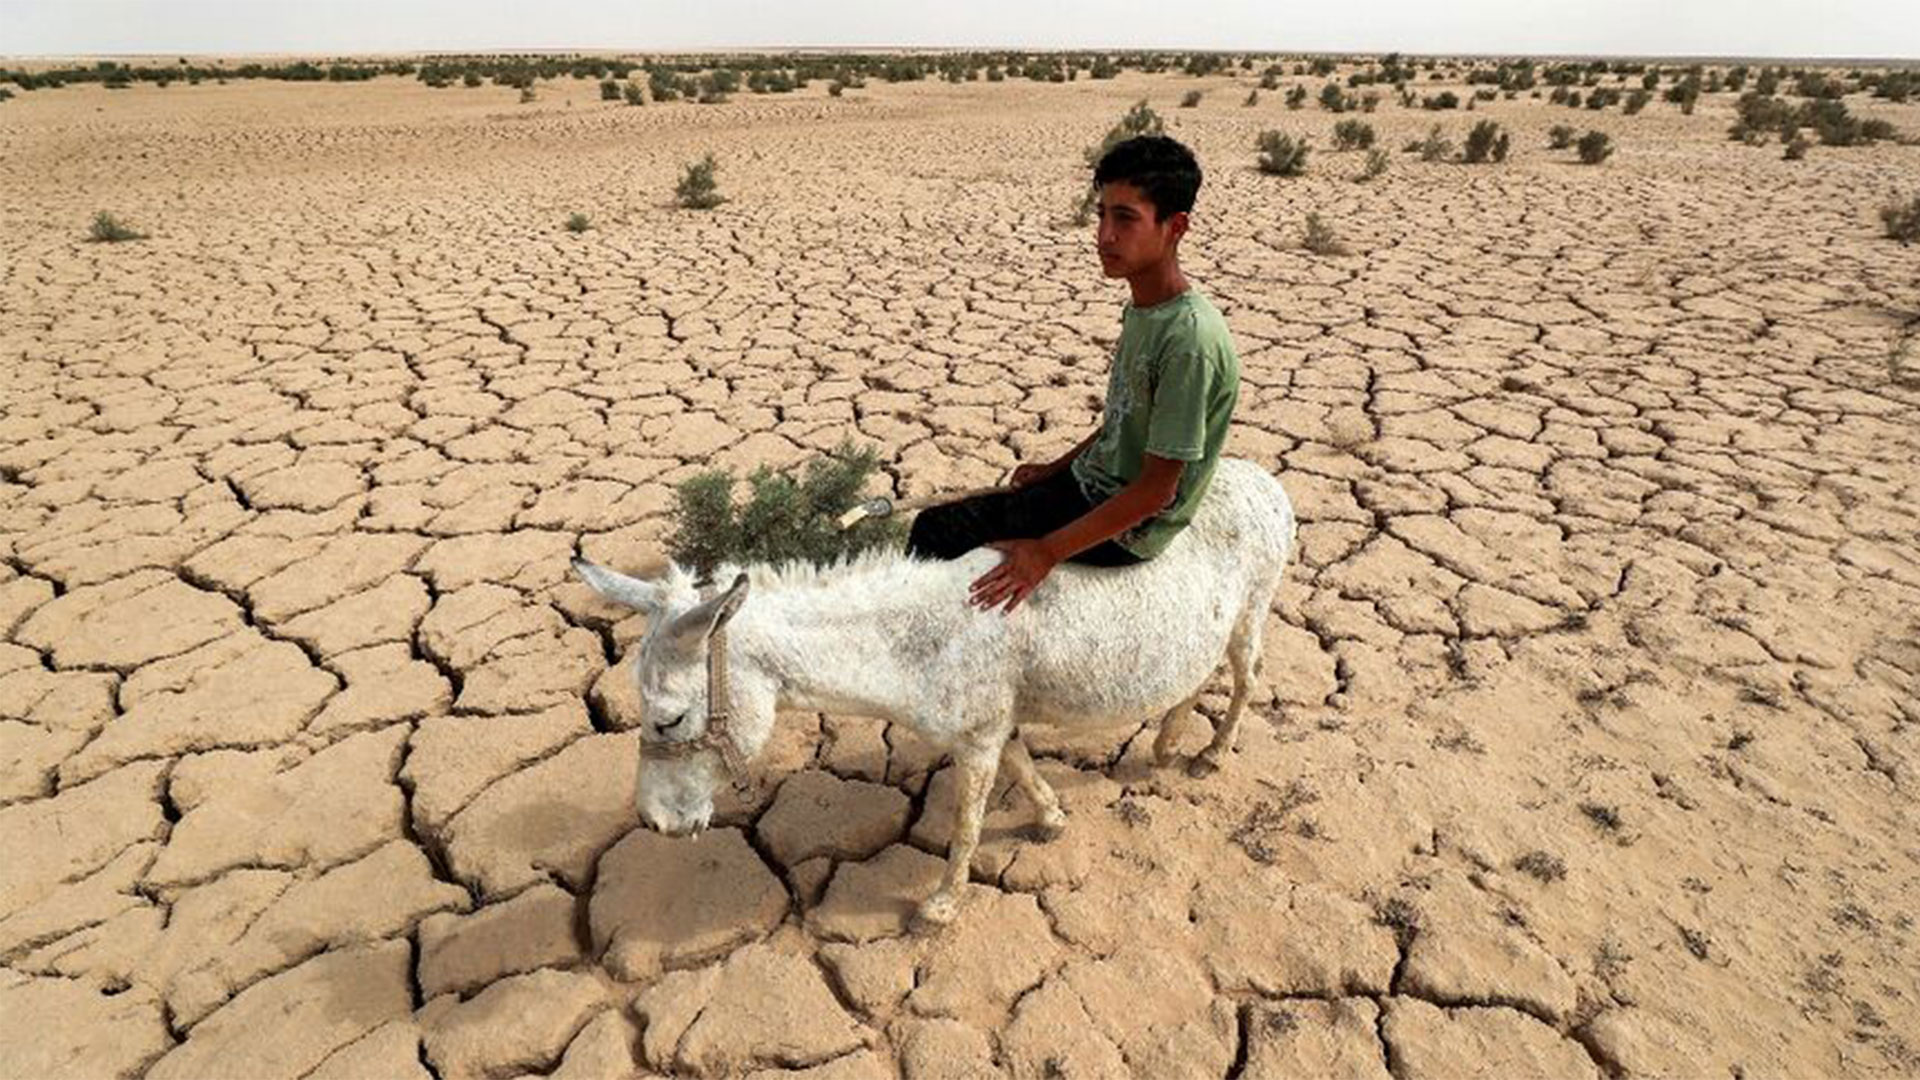  An Iraqi rides a donkey across the dried out lake bed that is all that is left of Lake Hamrin, in normal years a key irrigation reservoir AHMAD AL-RUBAYE AFP